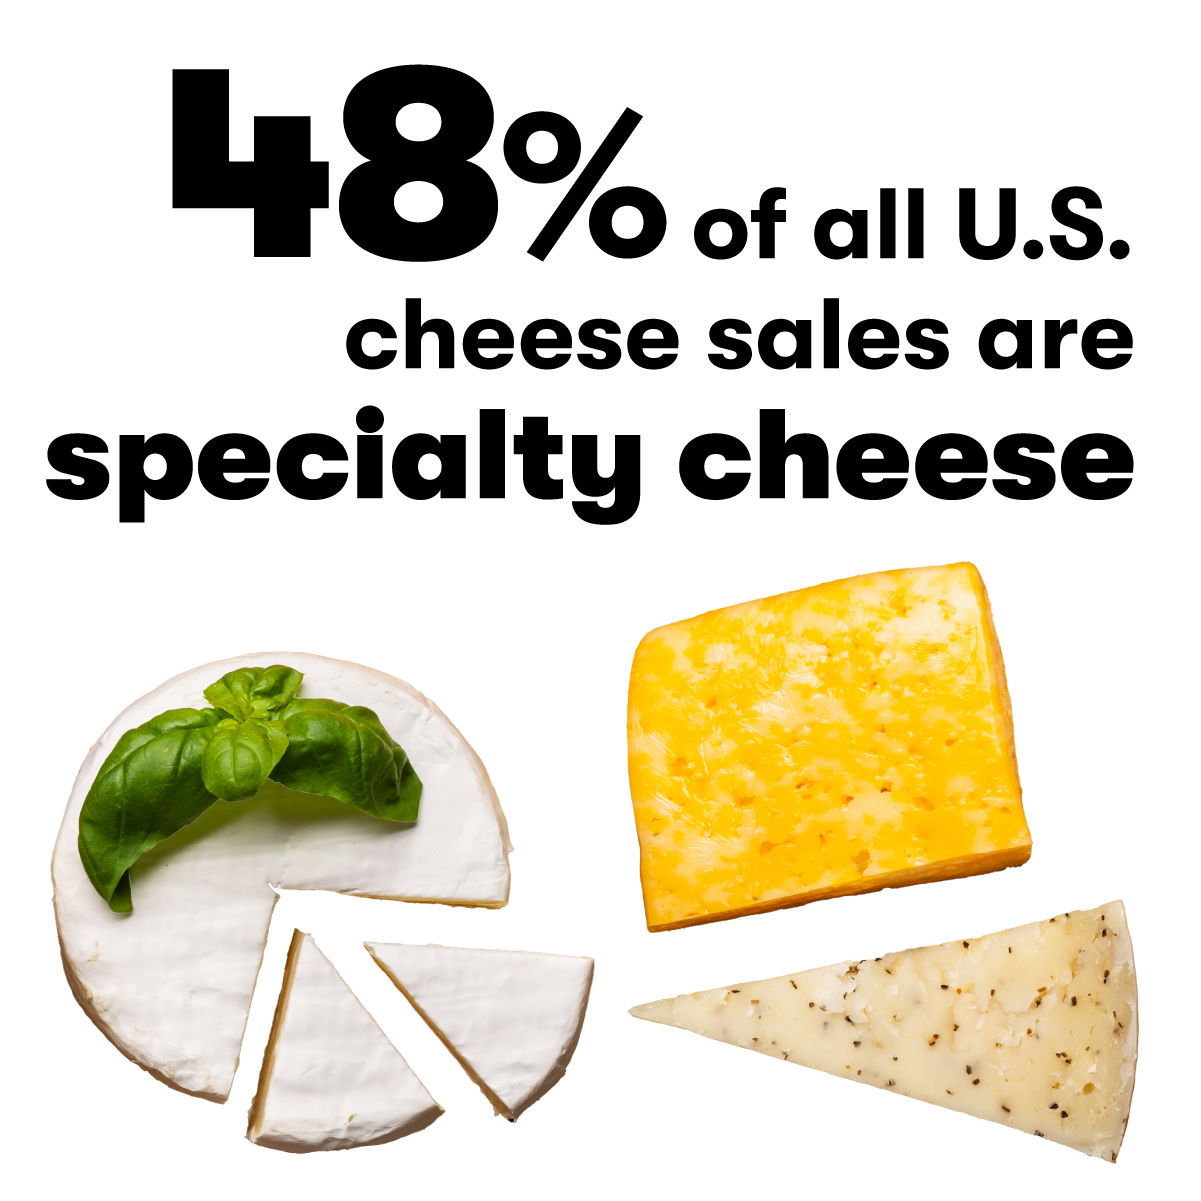 48% of all U.S. cheese sales are specialty cheese